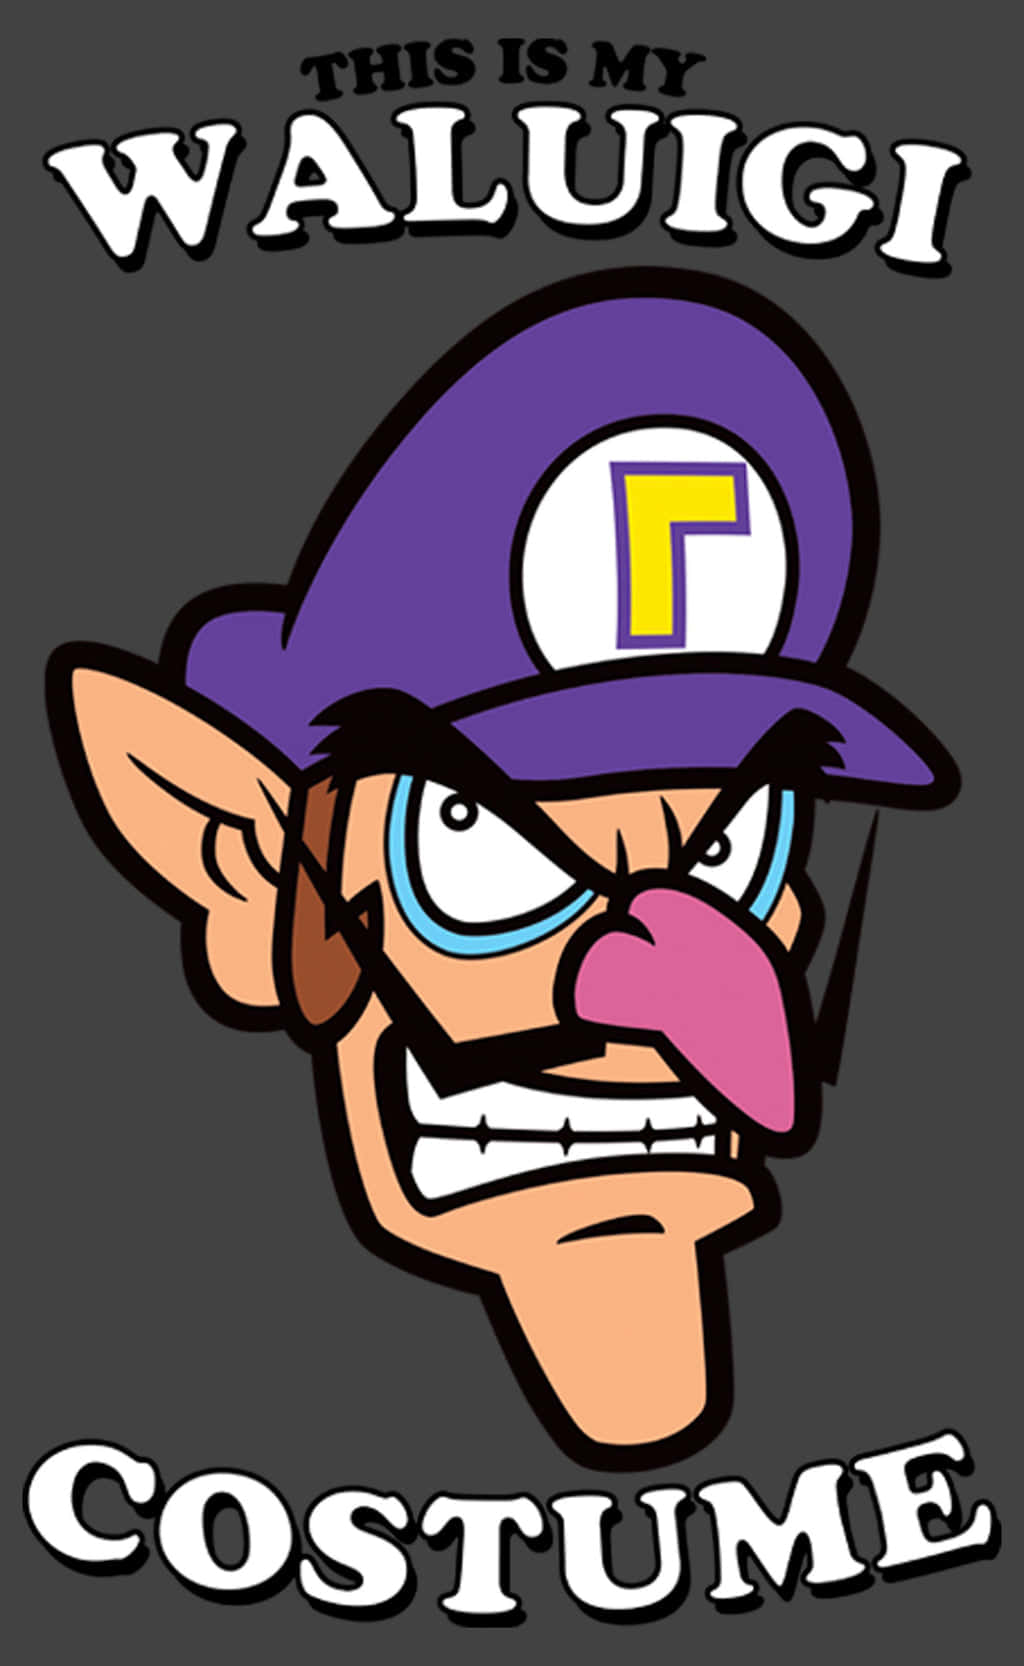 Caption: Waluigi striking a pose in his iconic purple outfit Wallpaper